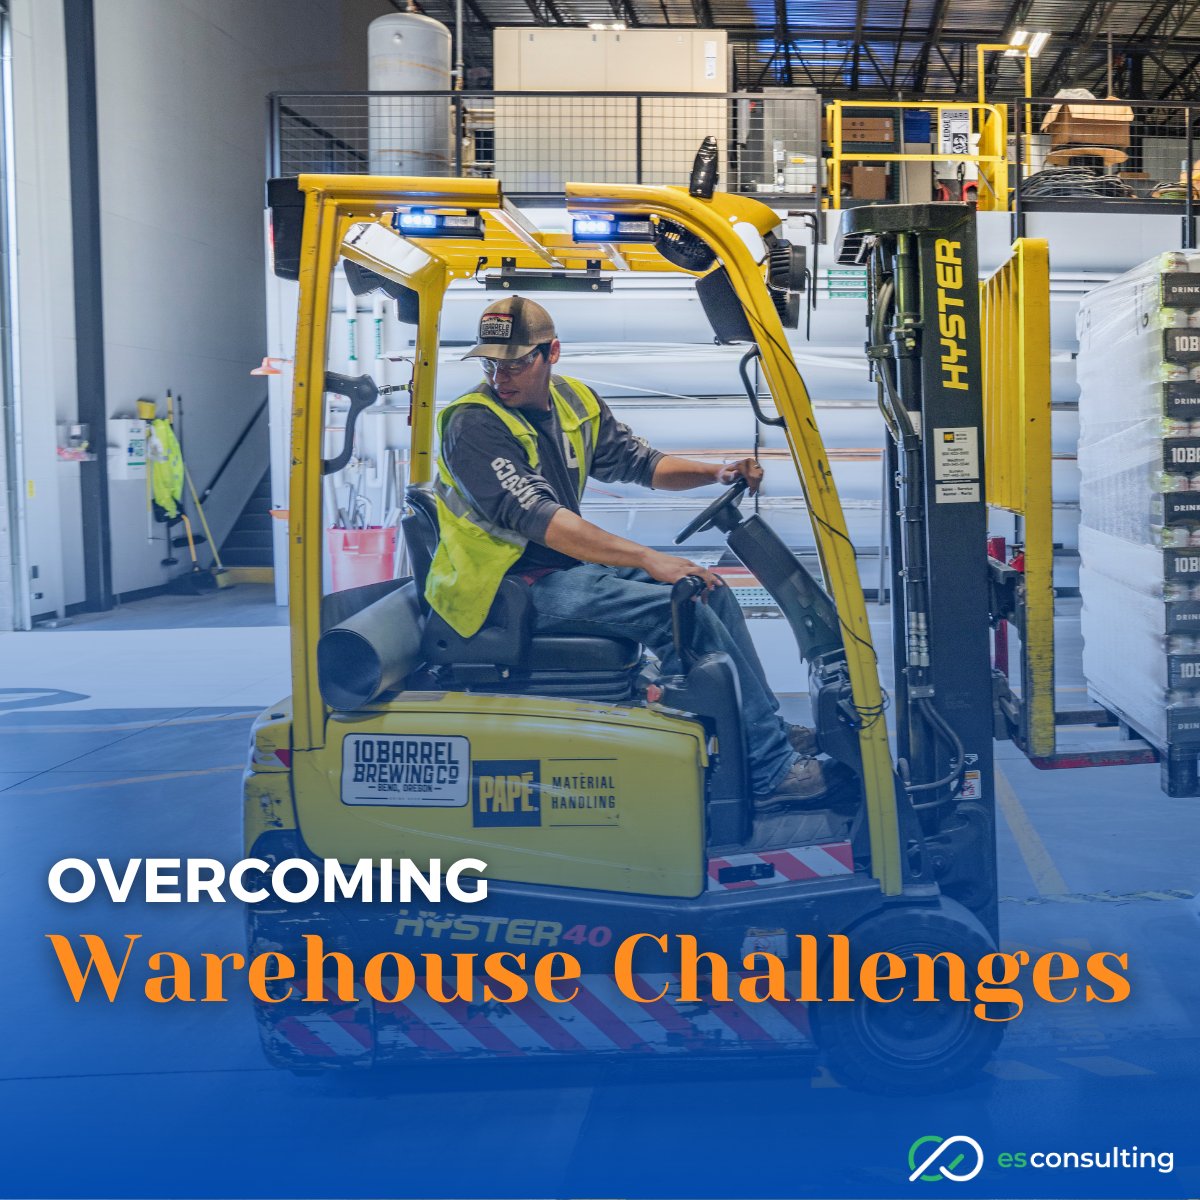 Overcome challenges in cycle counting with our guide to mitigating disruptions, reducing costs, and maintaining accuracy in your warehouse operations. #WarehouseChallenges #BestPractices #InventoryAccuracy